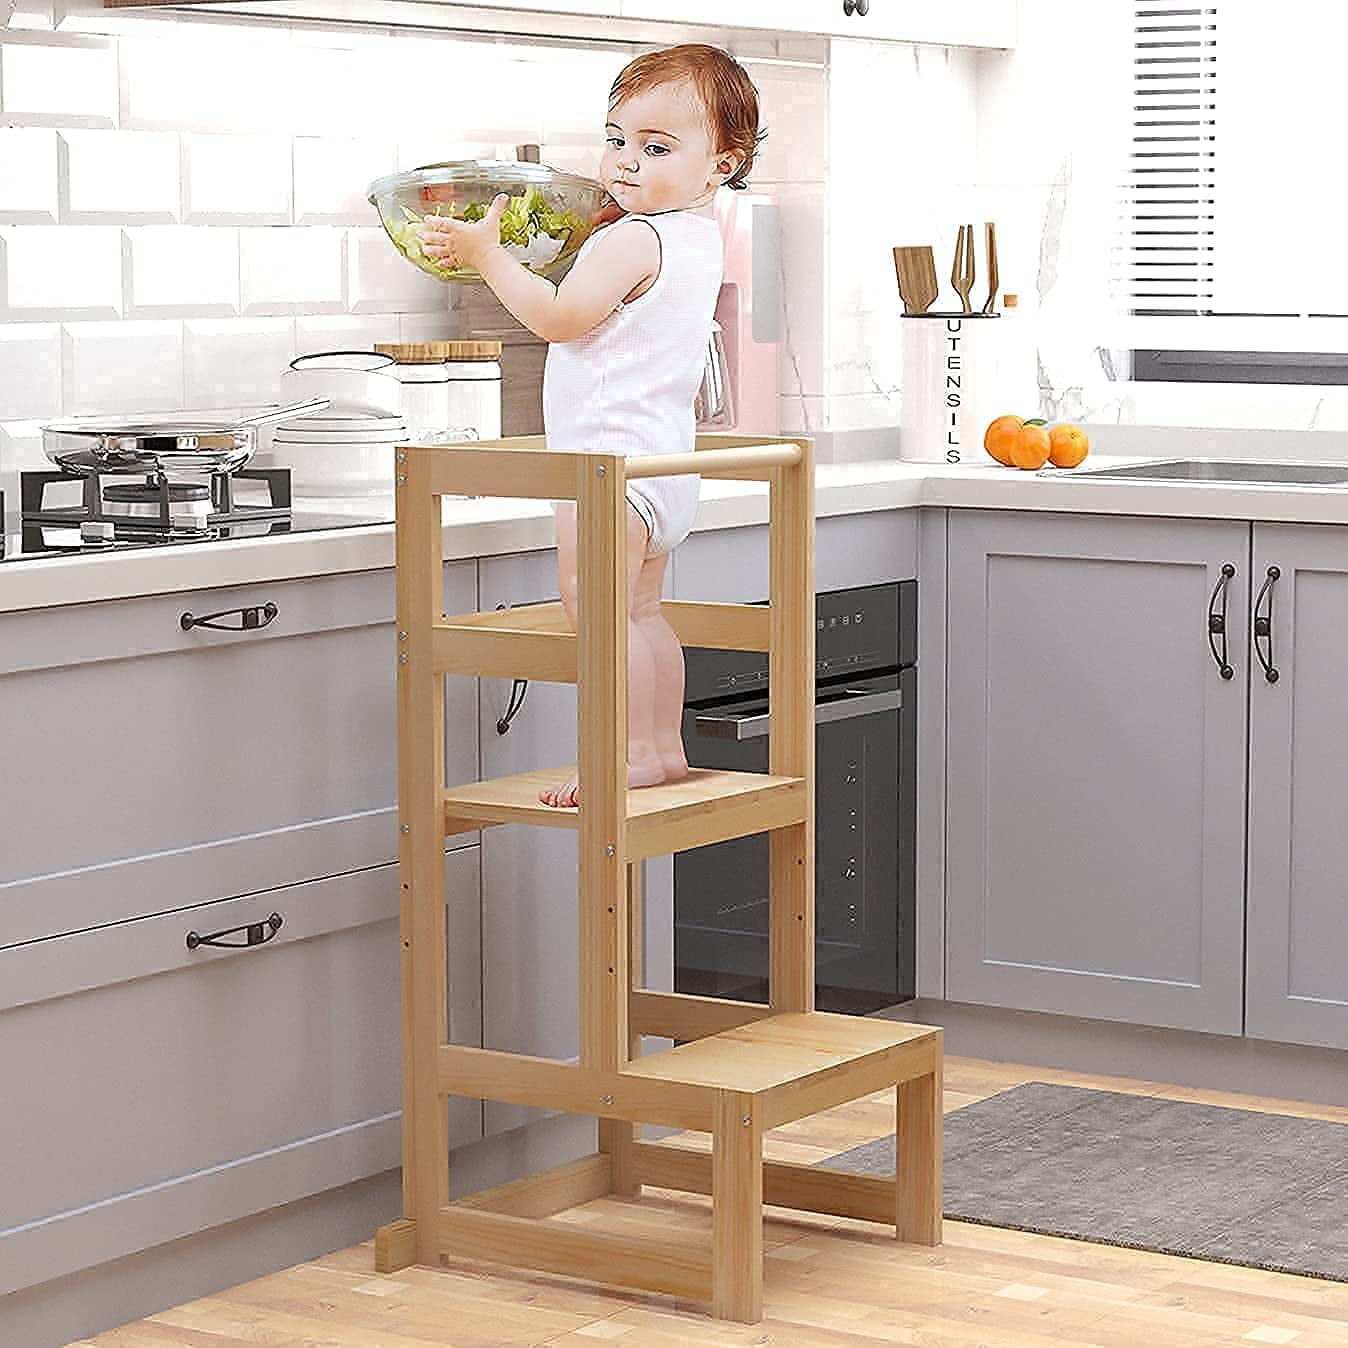 DTLI Kids Kitchen Step Stool Standing Tower for Counter & Bathroom Sink Safety Rail and Non-Slip Mats Kitchen Helper with 3 Adjustable Heights Natural Stable Solid Wood Construction 